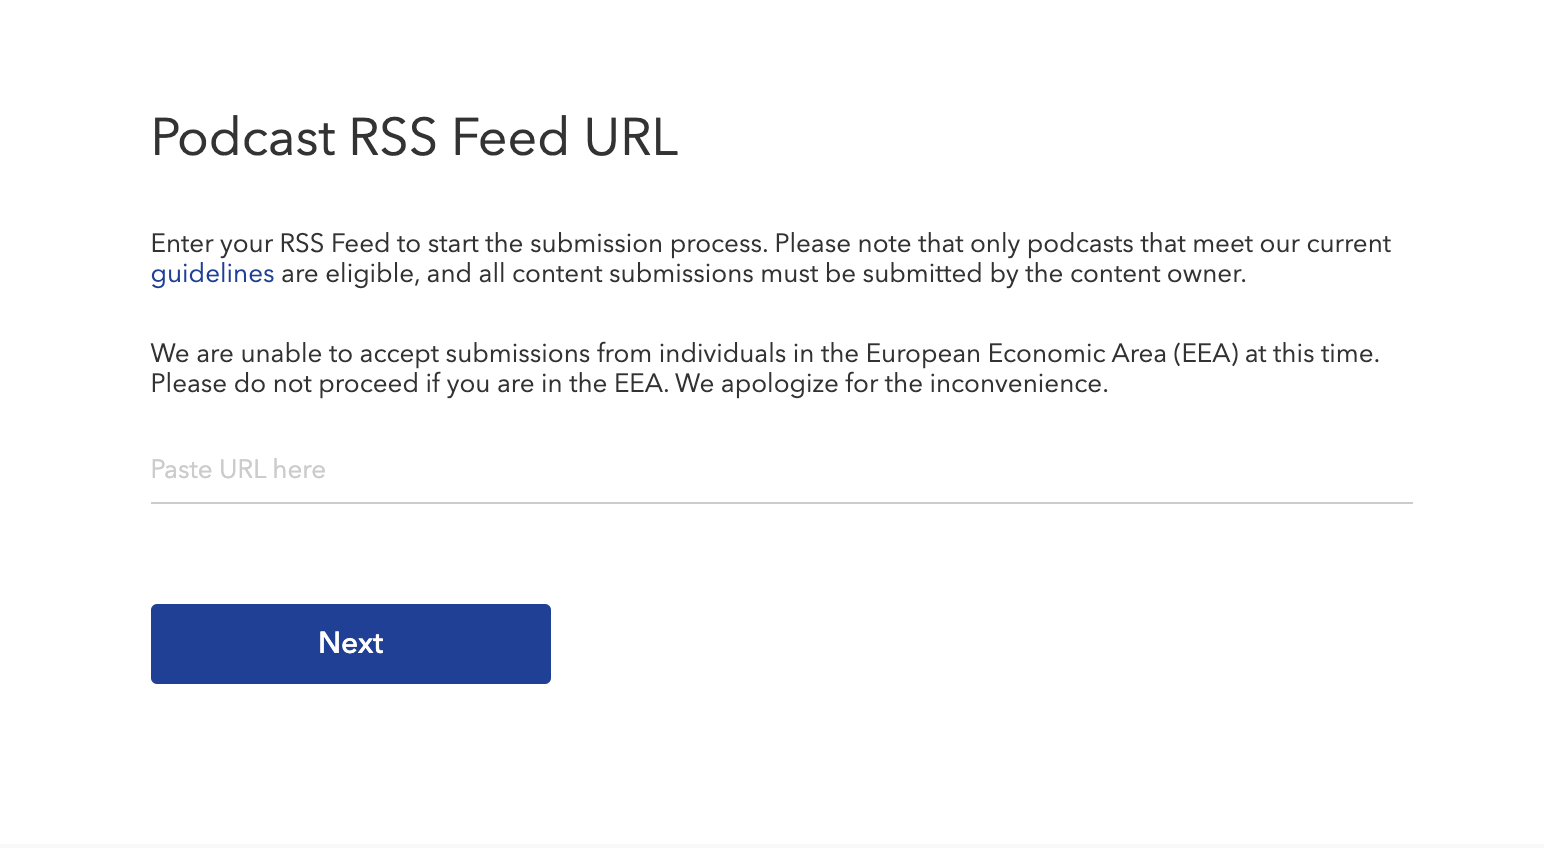 Submitting a podcast to Pandora with a RSS Feed URL